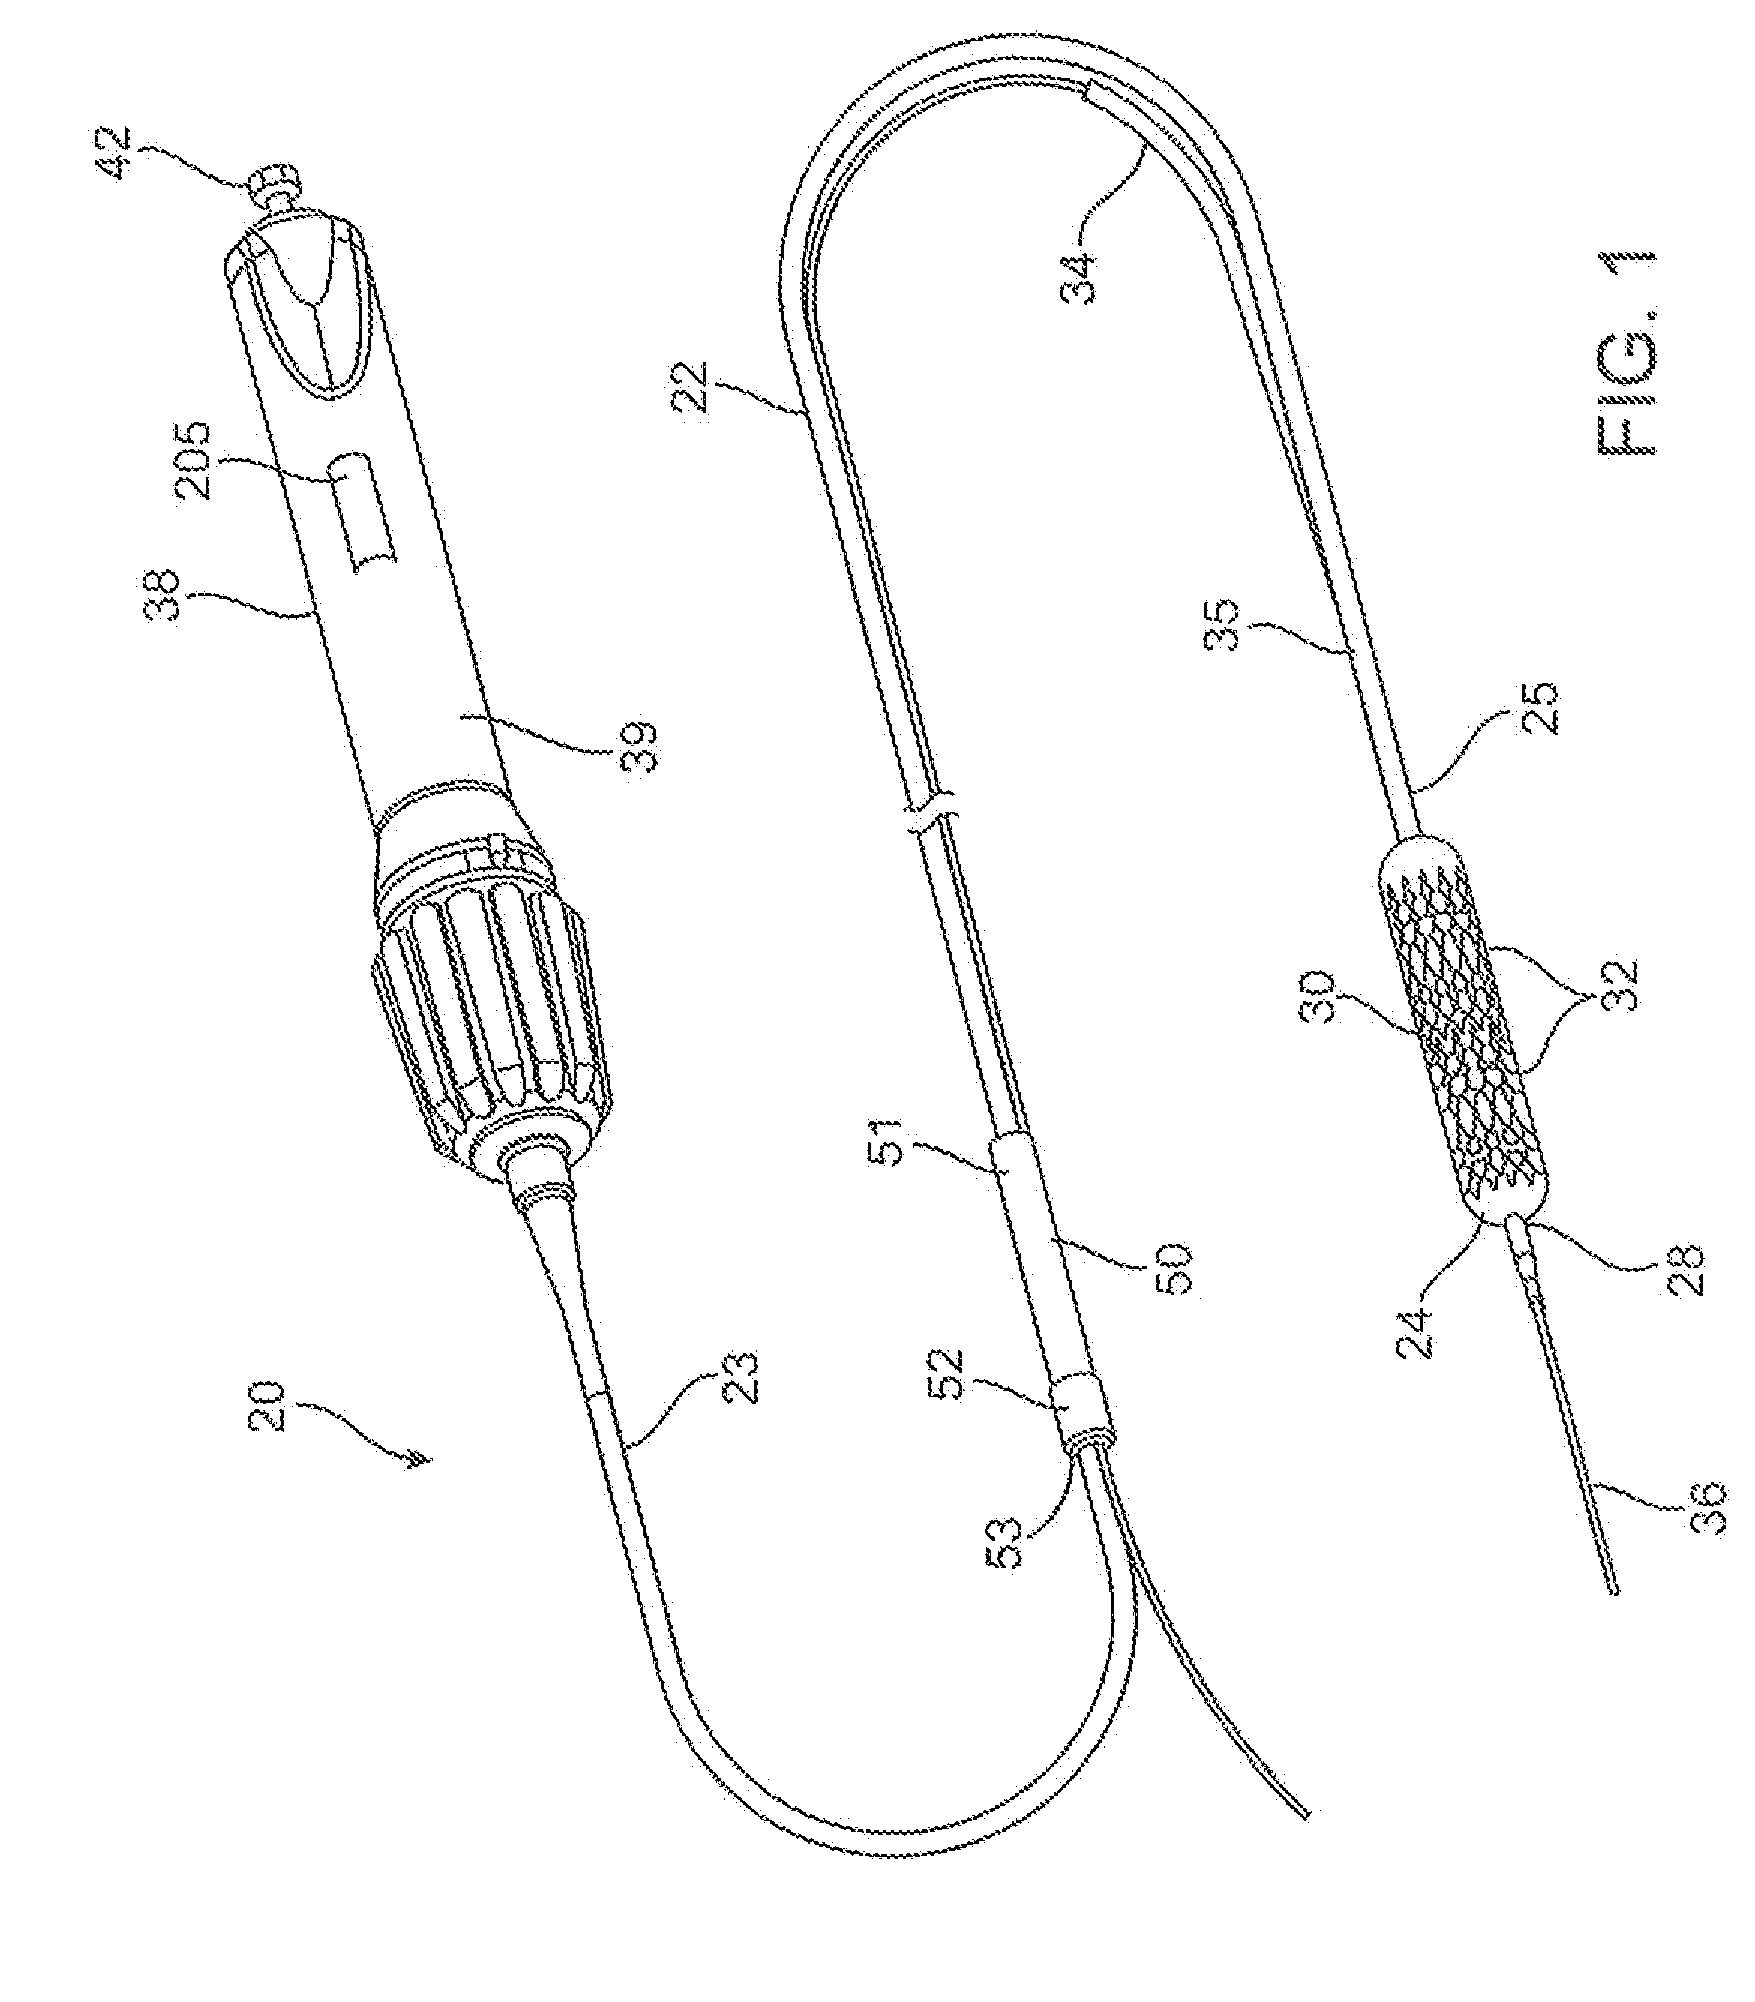 Devices and methods for controlling and counting interventional elements